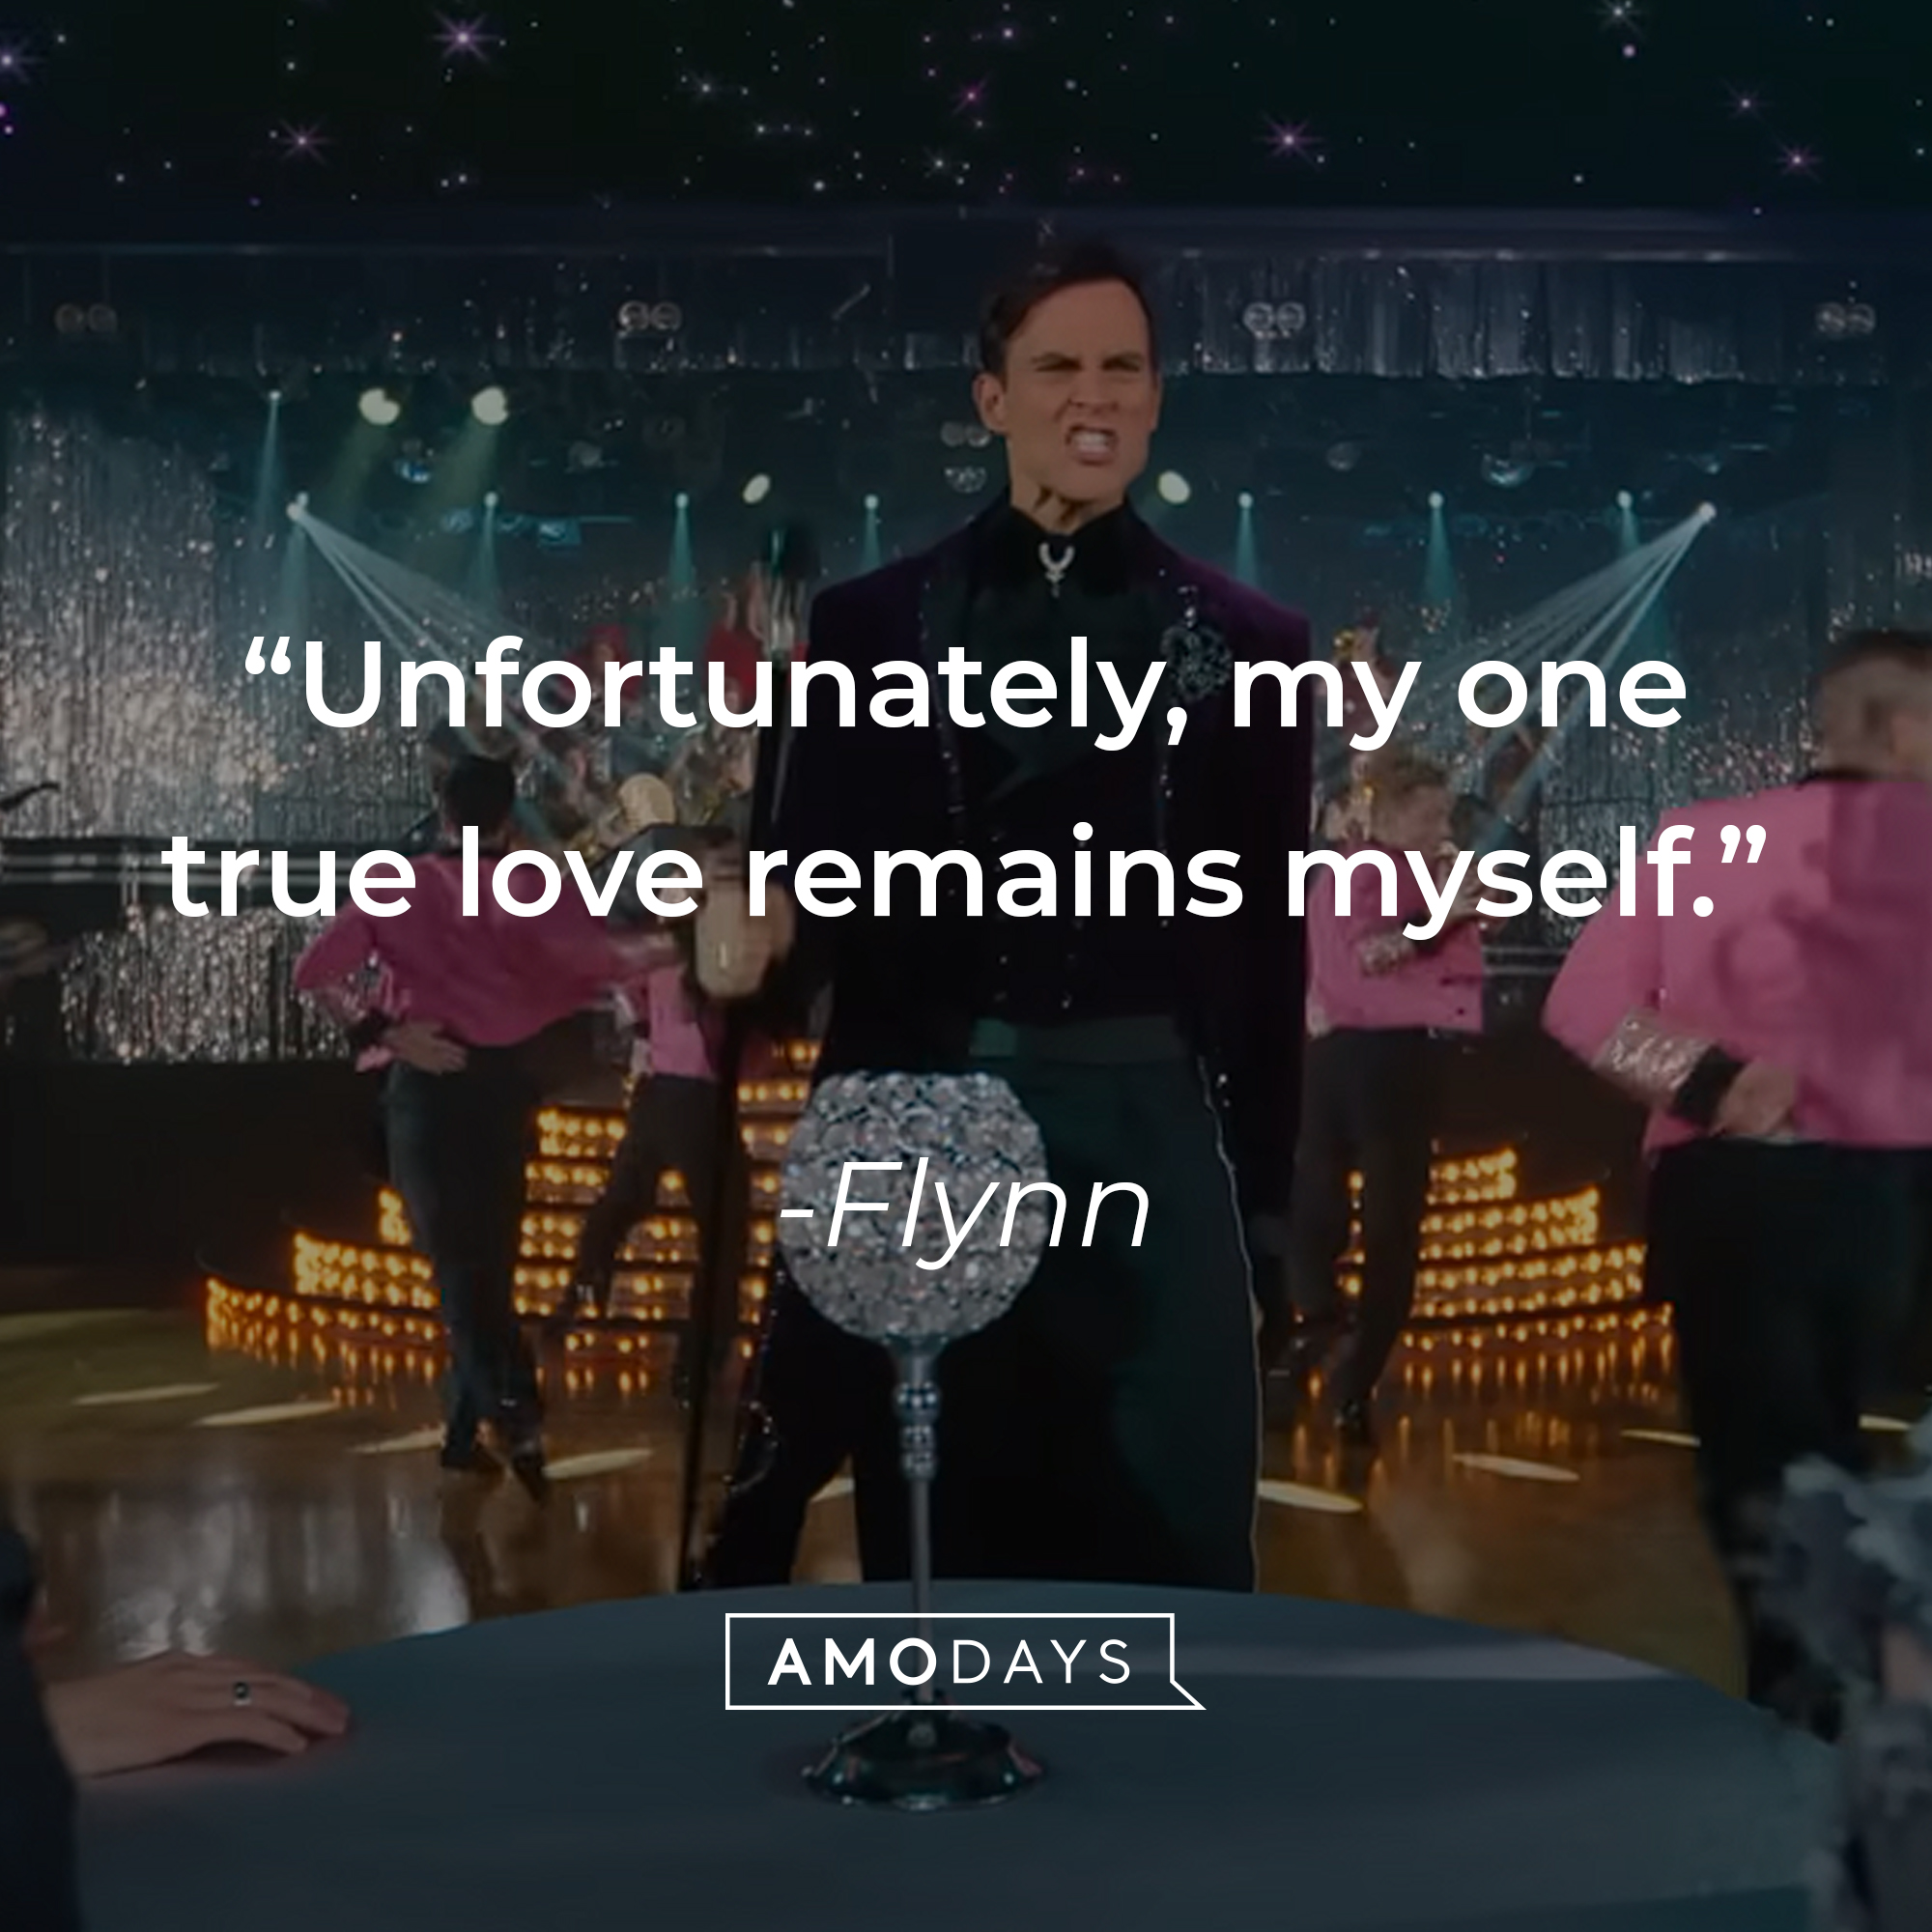 An image of Caleb Covington with Flyn’s quote: “Unfortunately, my one true love remains myself.” | Source: youtube.com/netflixafterschool